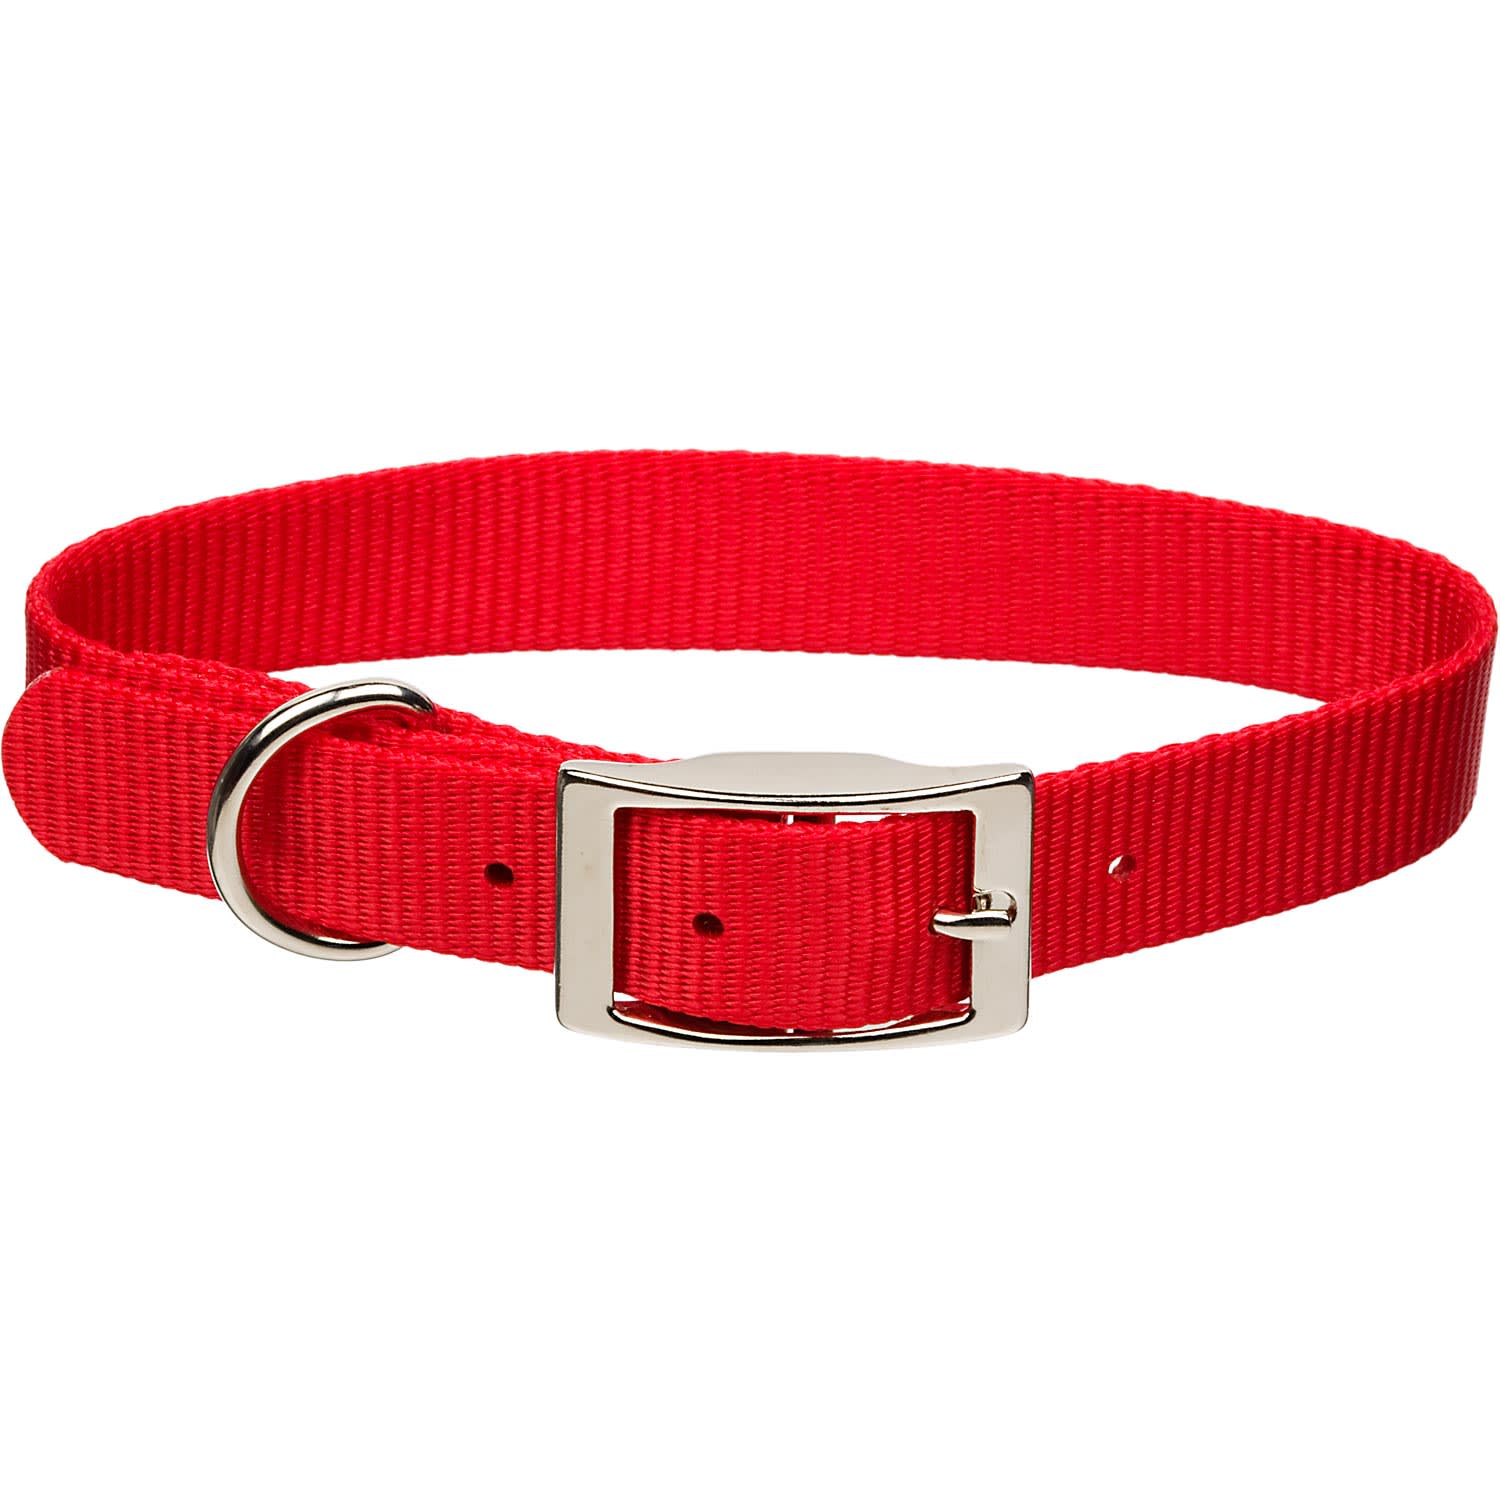 Coastal Pet Metal Buckle Nylon Personalized Dog Collar in Red, 3/4 Width